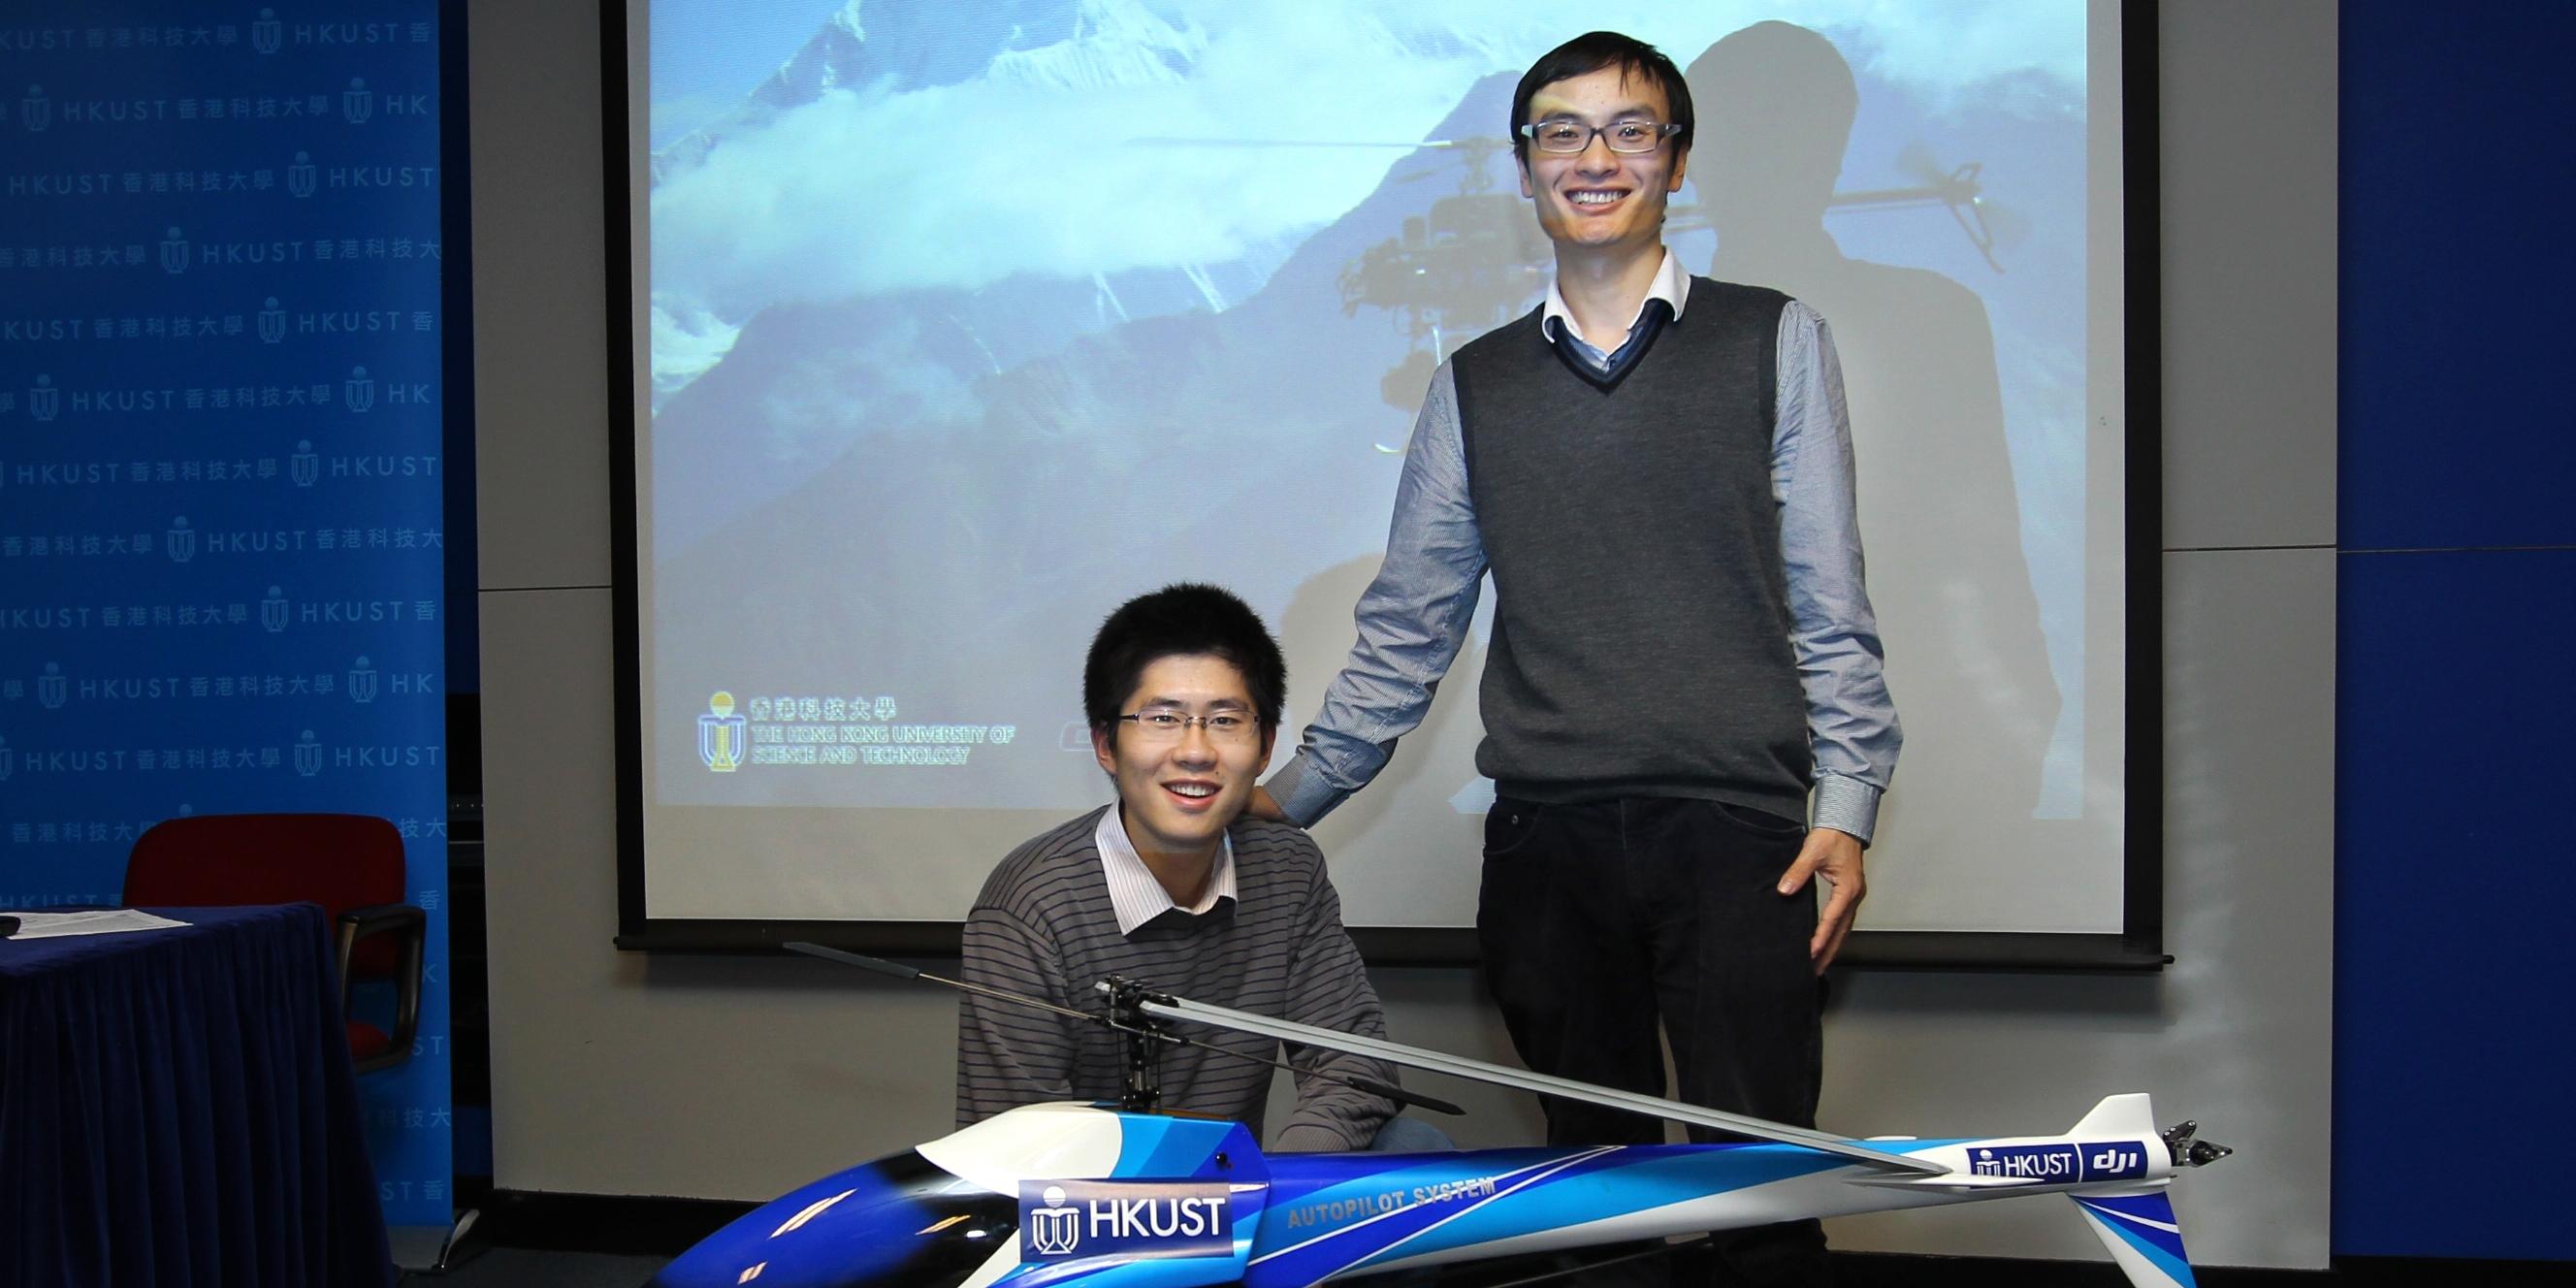 Frank Wang (right) and Jianyu Song with their helicopter